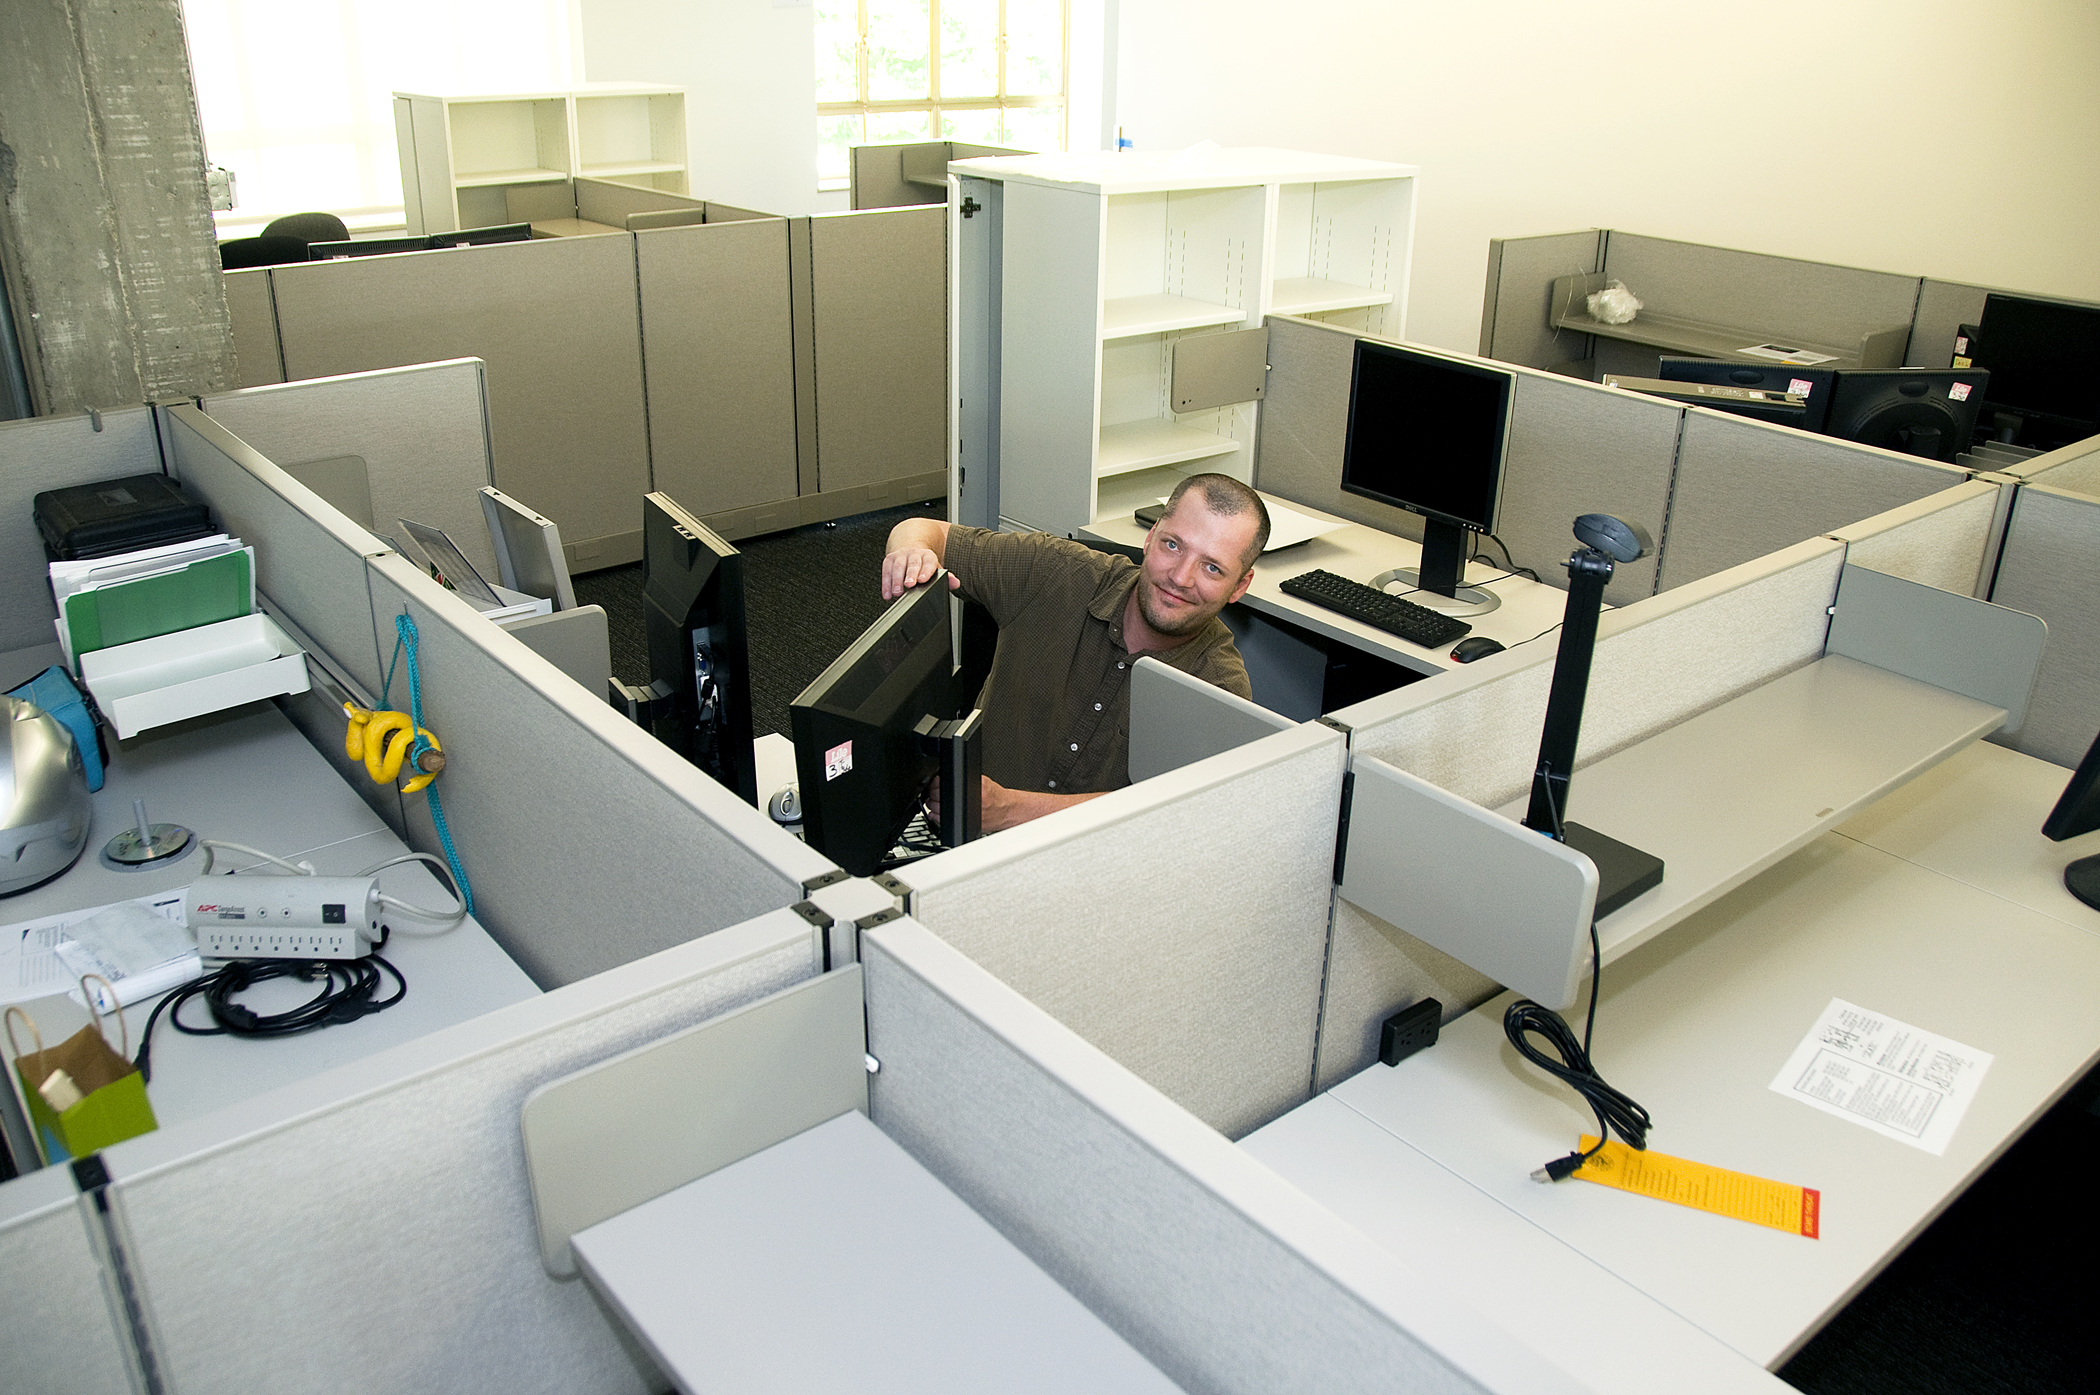 an office cubicle is shown with two cubicles and a man leaning over the top of the cubicle